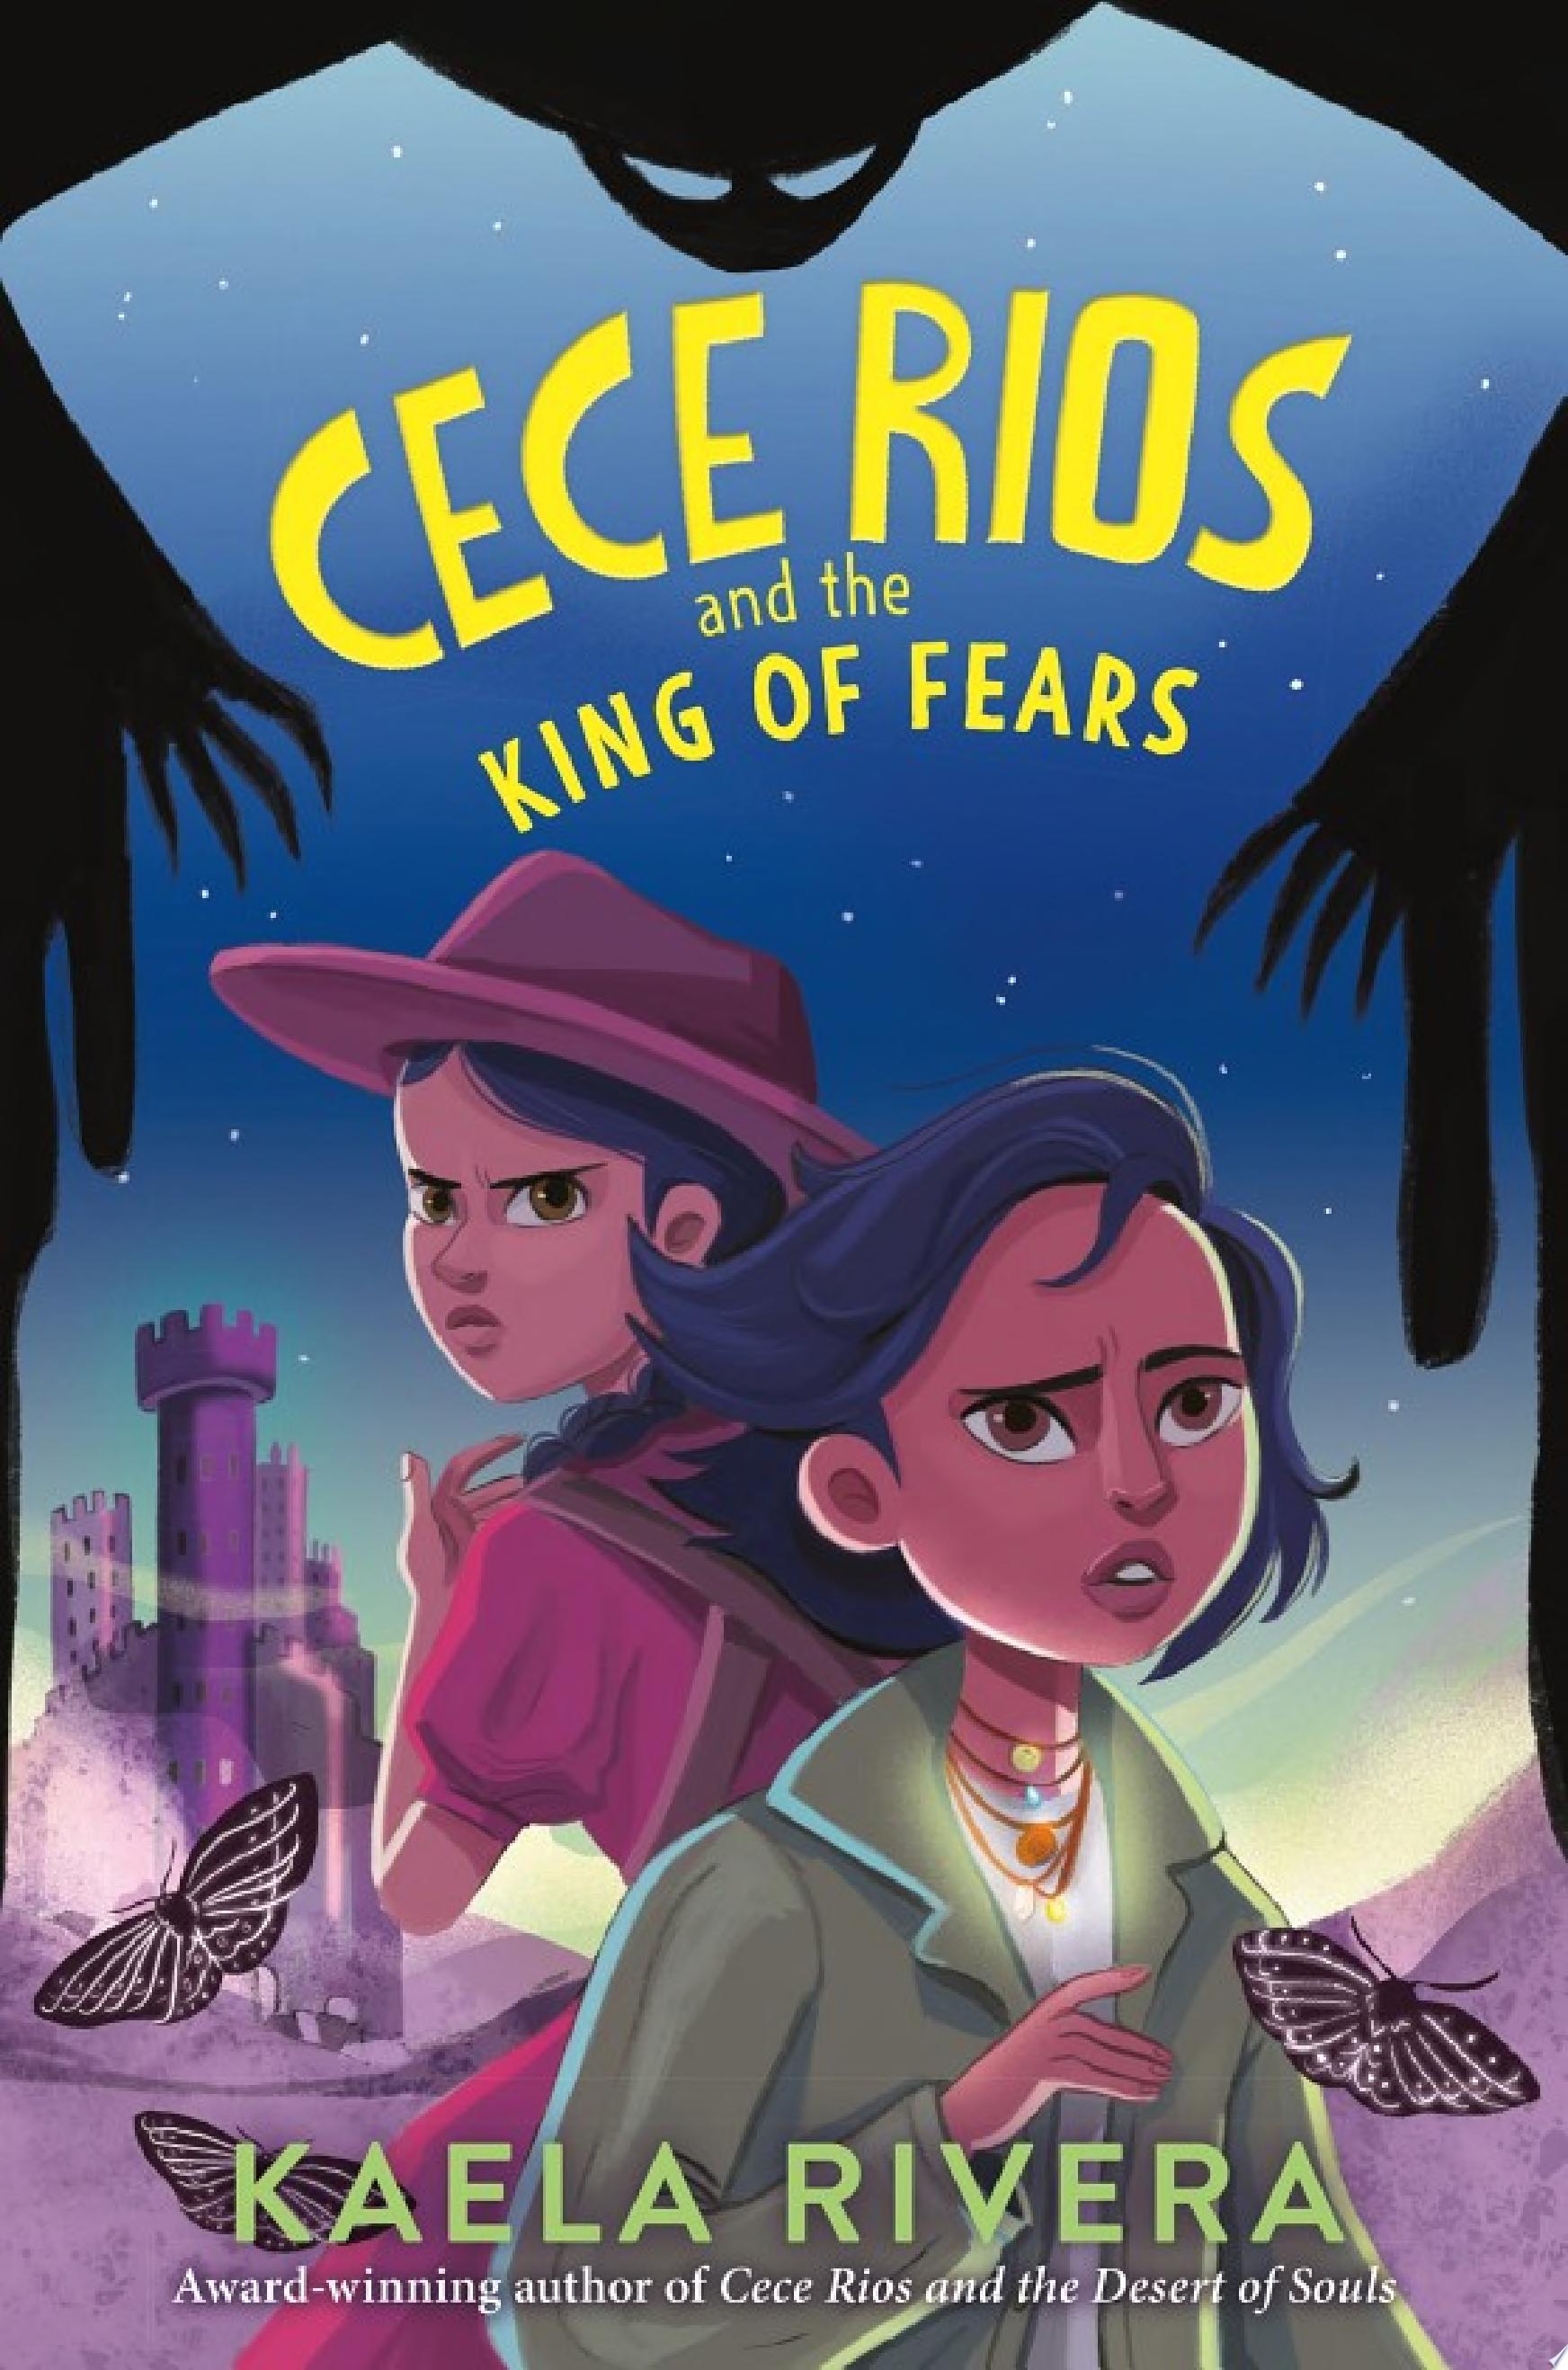 Image for "Cece Rios and the King of Fears"